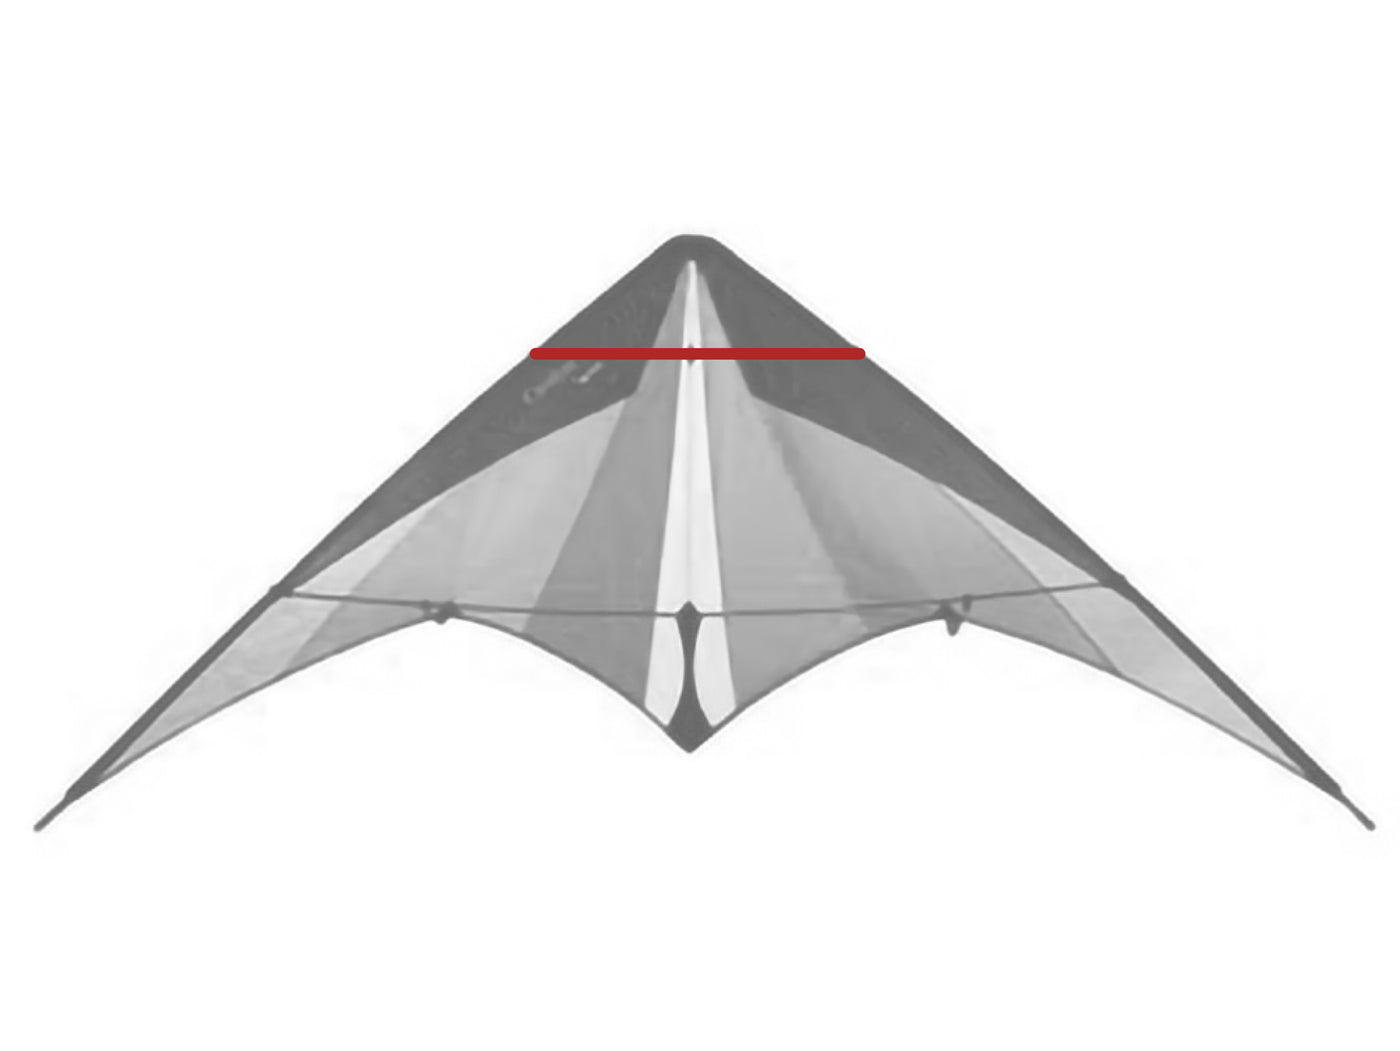 Diagram showing location of the Catalyst Upper Spreader on the kite.